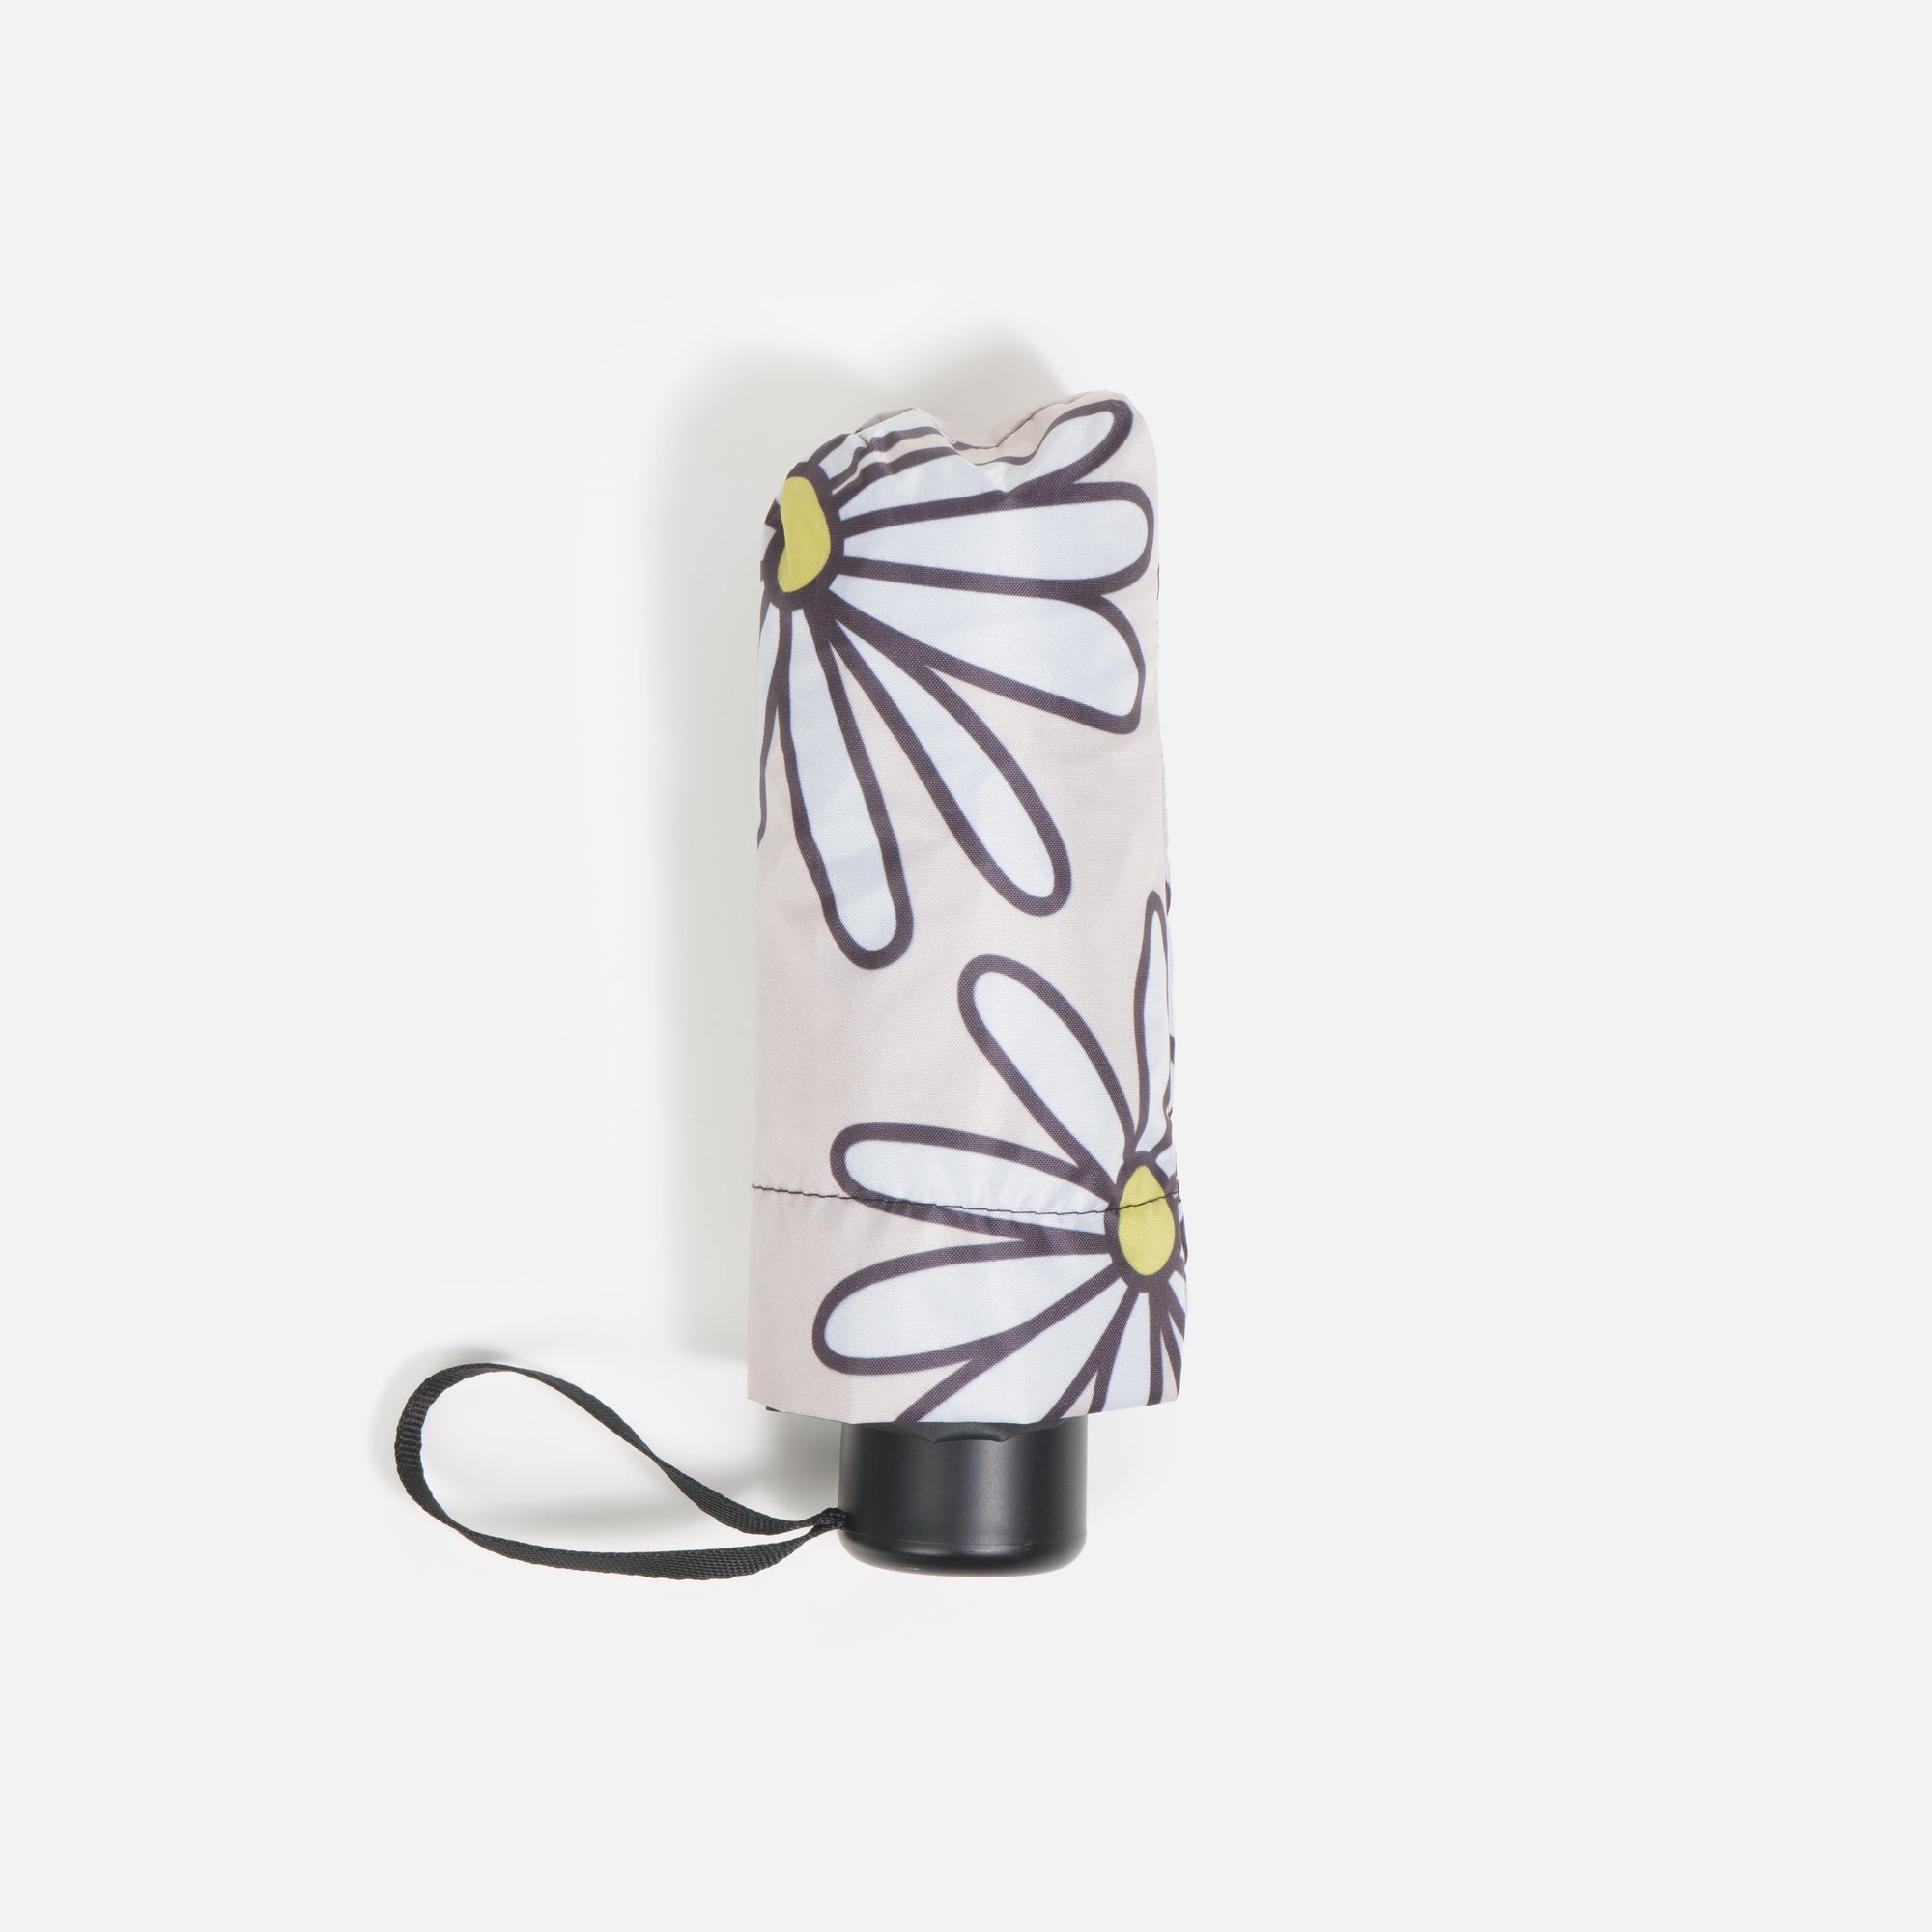 Beige umbrella with daisies and storage bag